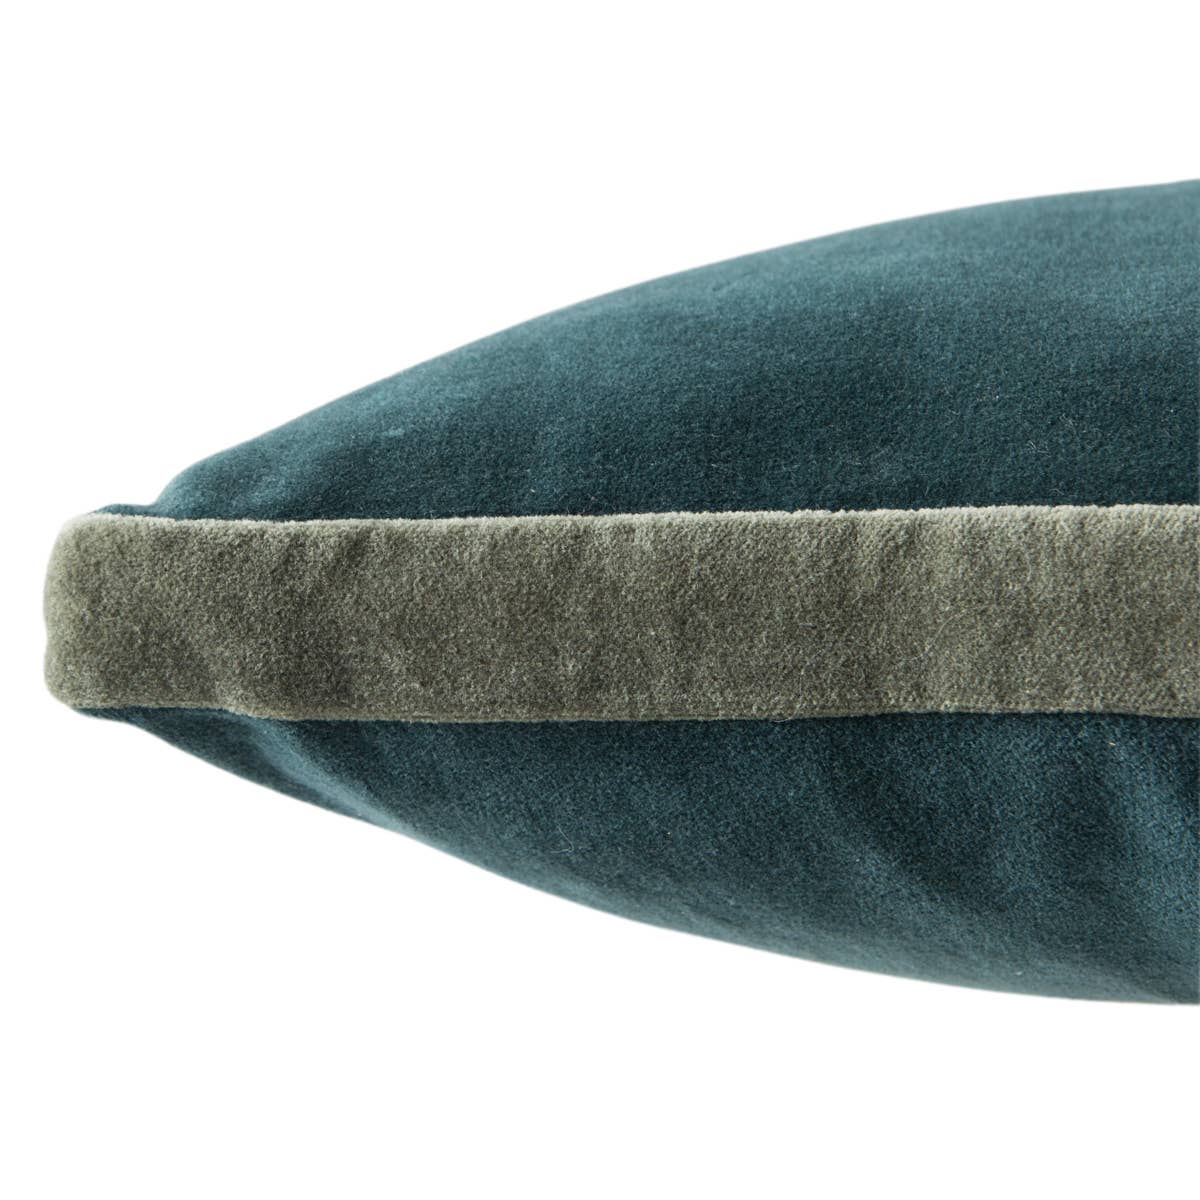 Emerson Bryn 18 x 18 Indoor Pillow by Jaipur Living | Luxury Pillows | Willow & Albert Home